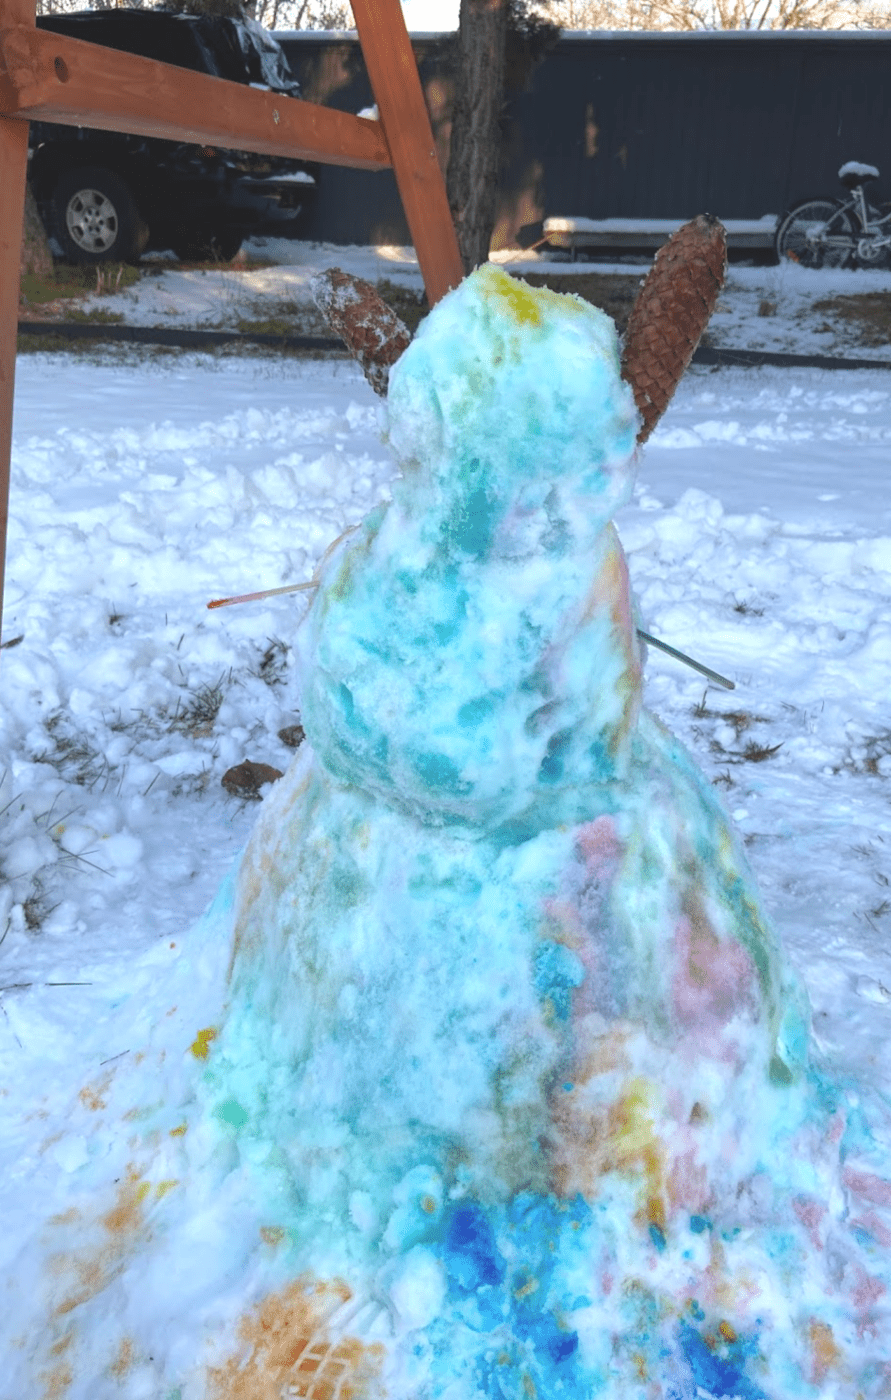 A colorful snowman with pinecone ears.